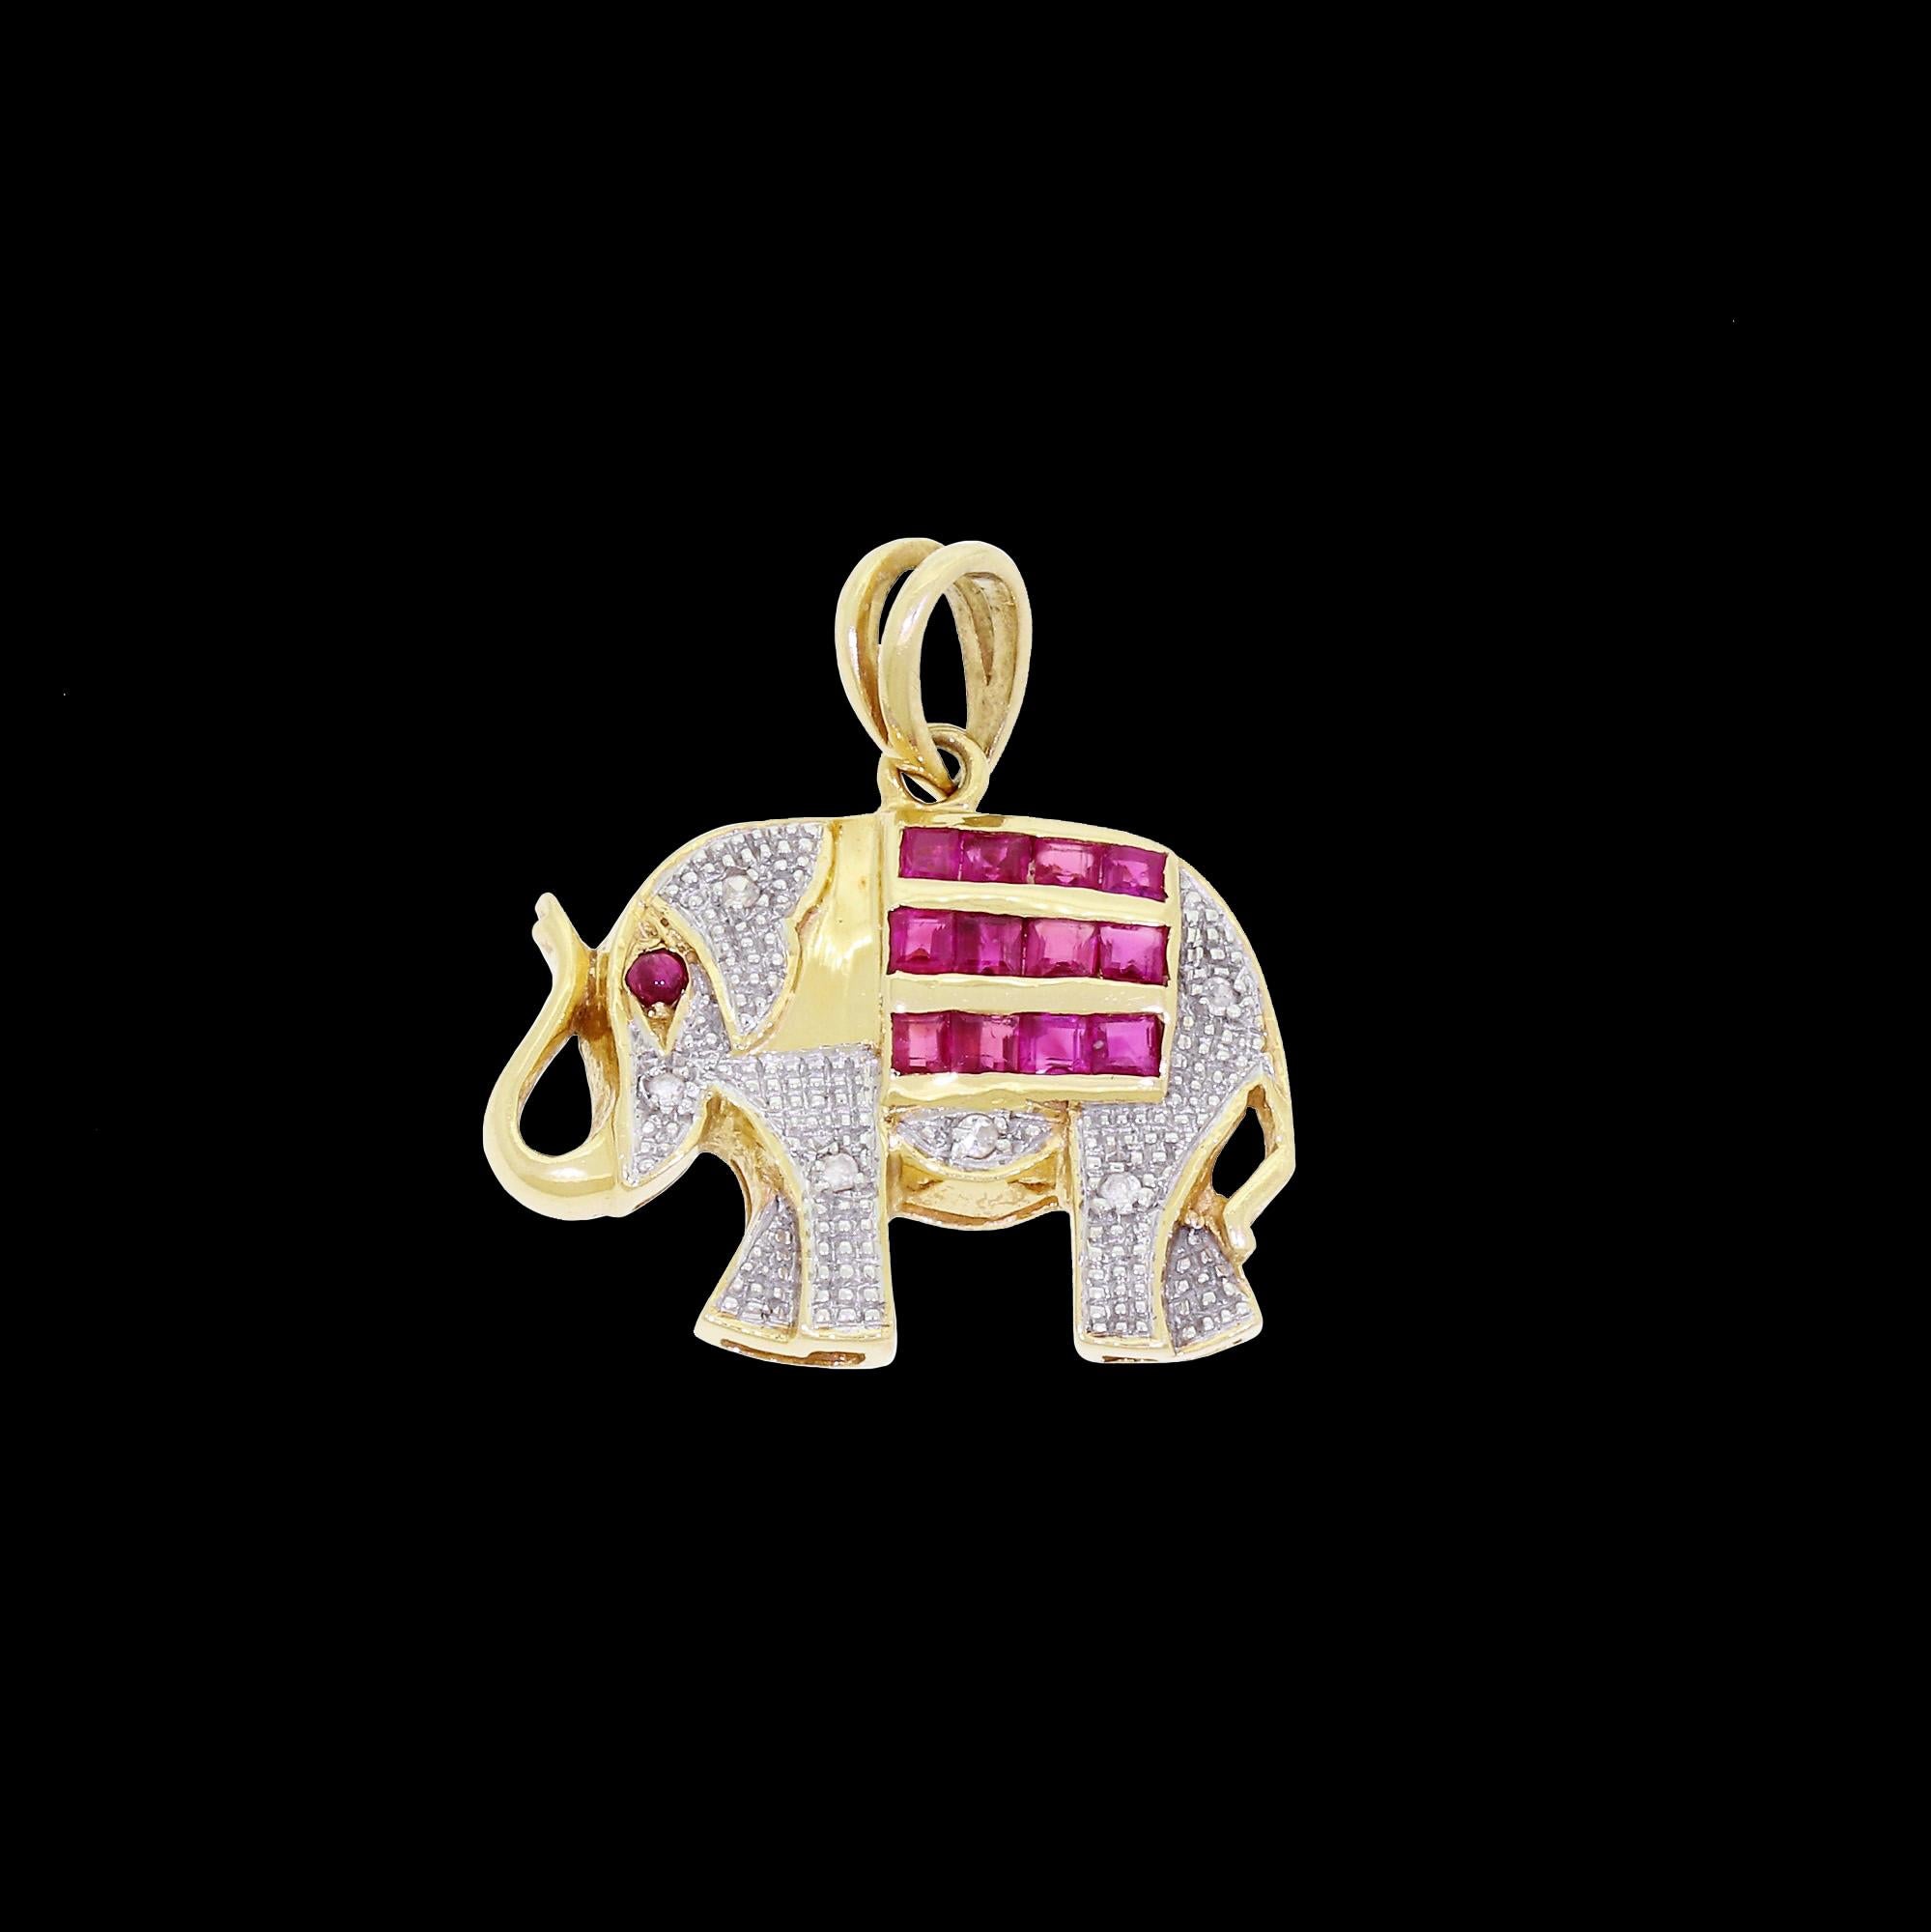 This fabulous petite sized elephant charm is crafted from 14K yellow & white gold, with genuine diamond and ruby gemstones. Featuring a charming elephant with its' trunk raised, this pendant is rumored to bring luck and good fortune to its'